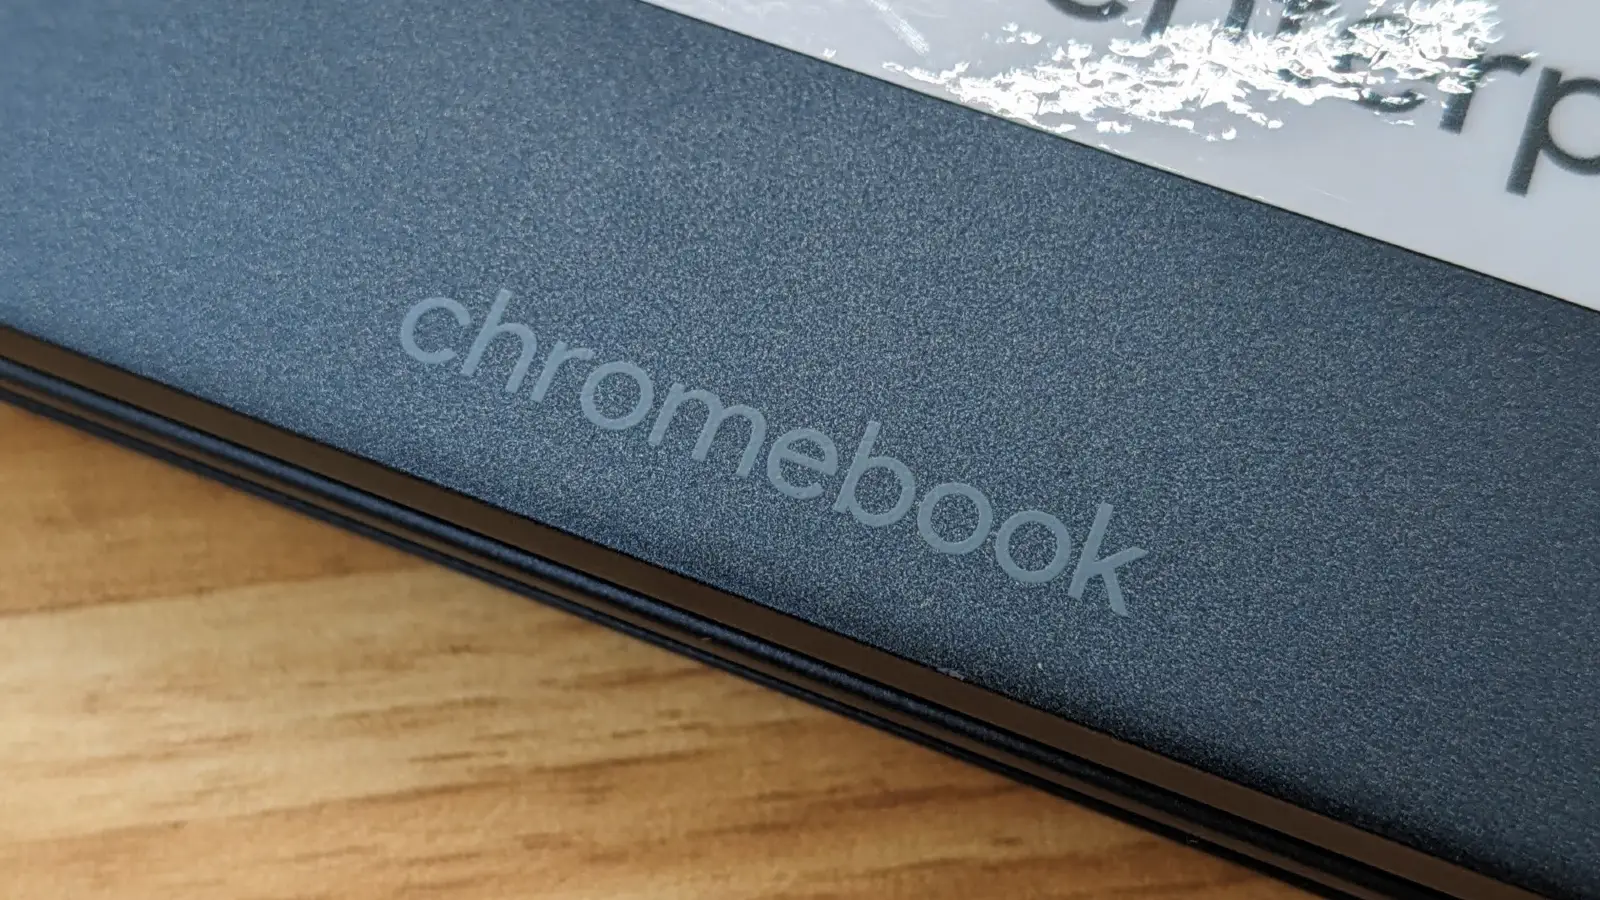 ChromeOS release notes 123 published |  HelenTech